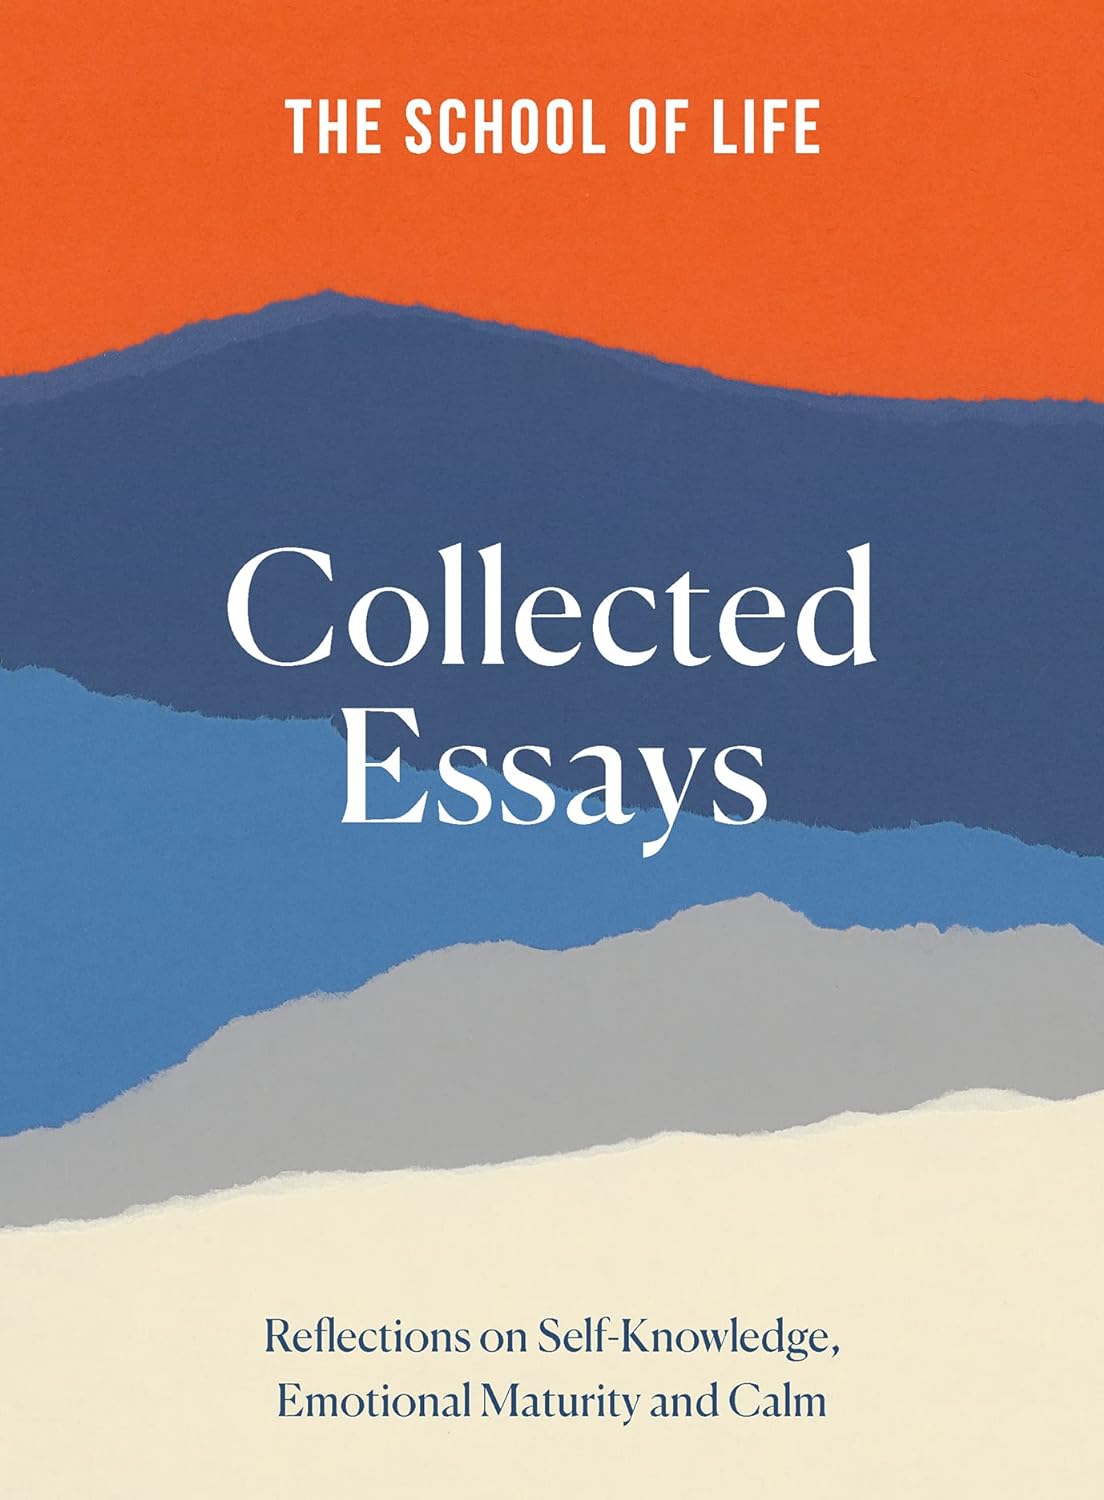 Collected Essays - The School of Life